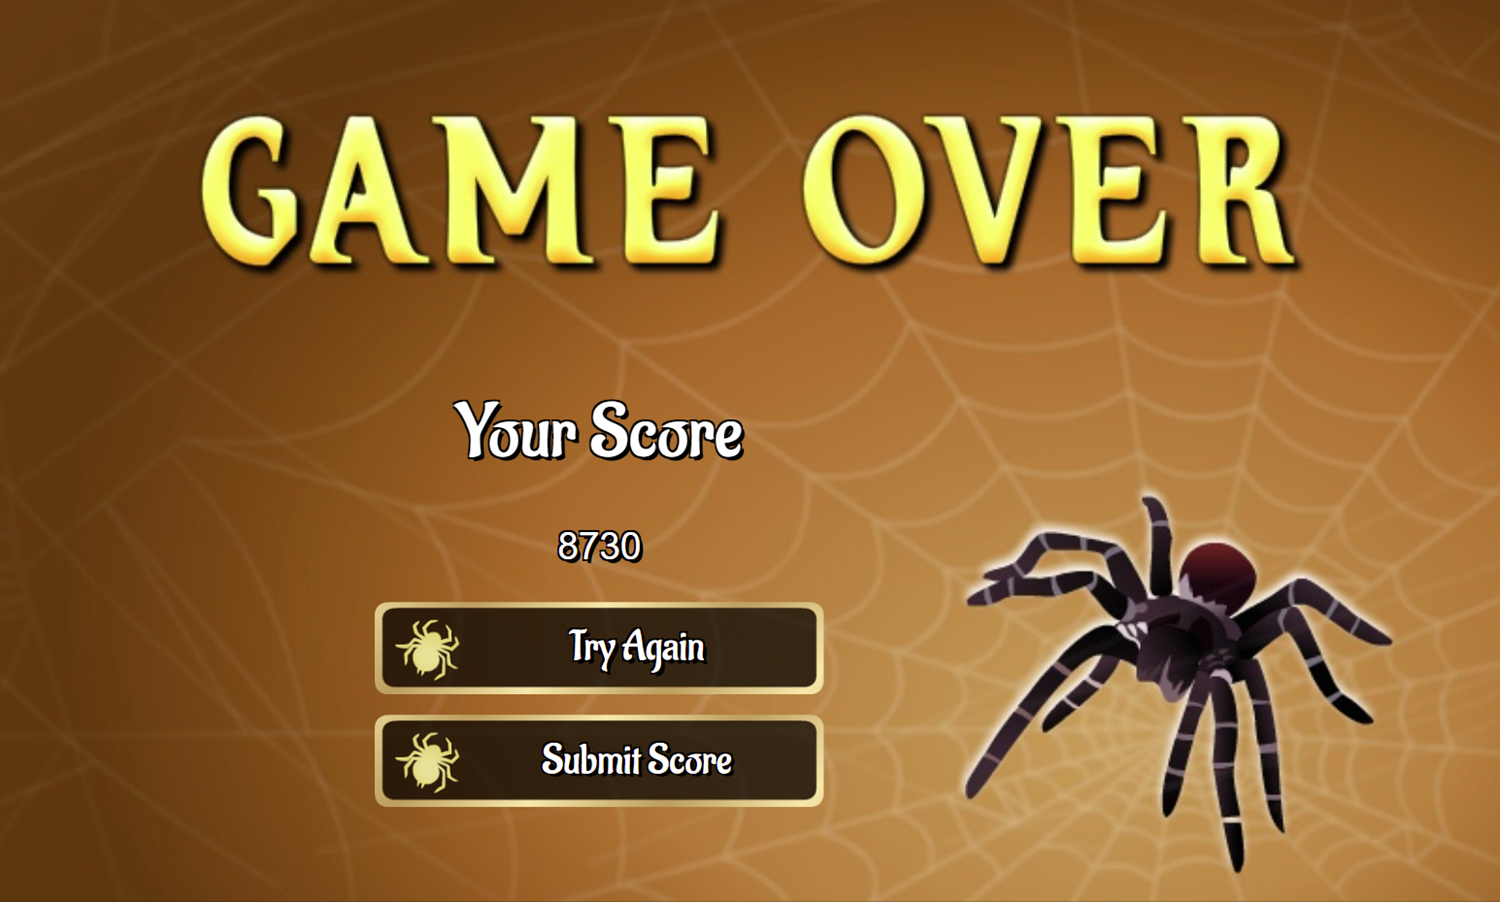 Jumping Spider Solitaire Game Over Screen Screenshot.